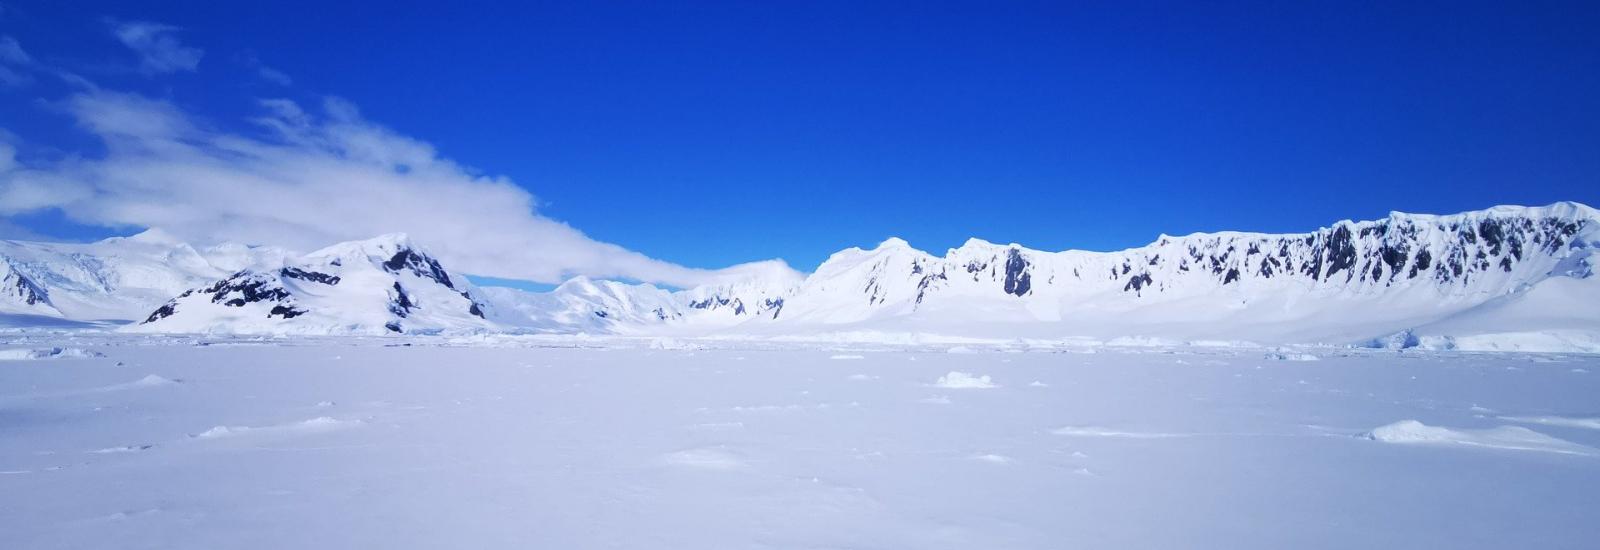 Snow covered ground and mountains in a distance under blue skies and white clouds.